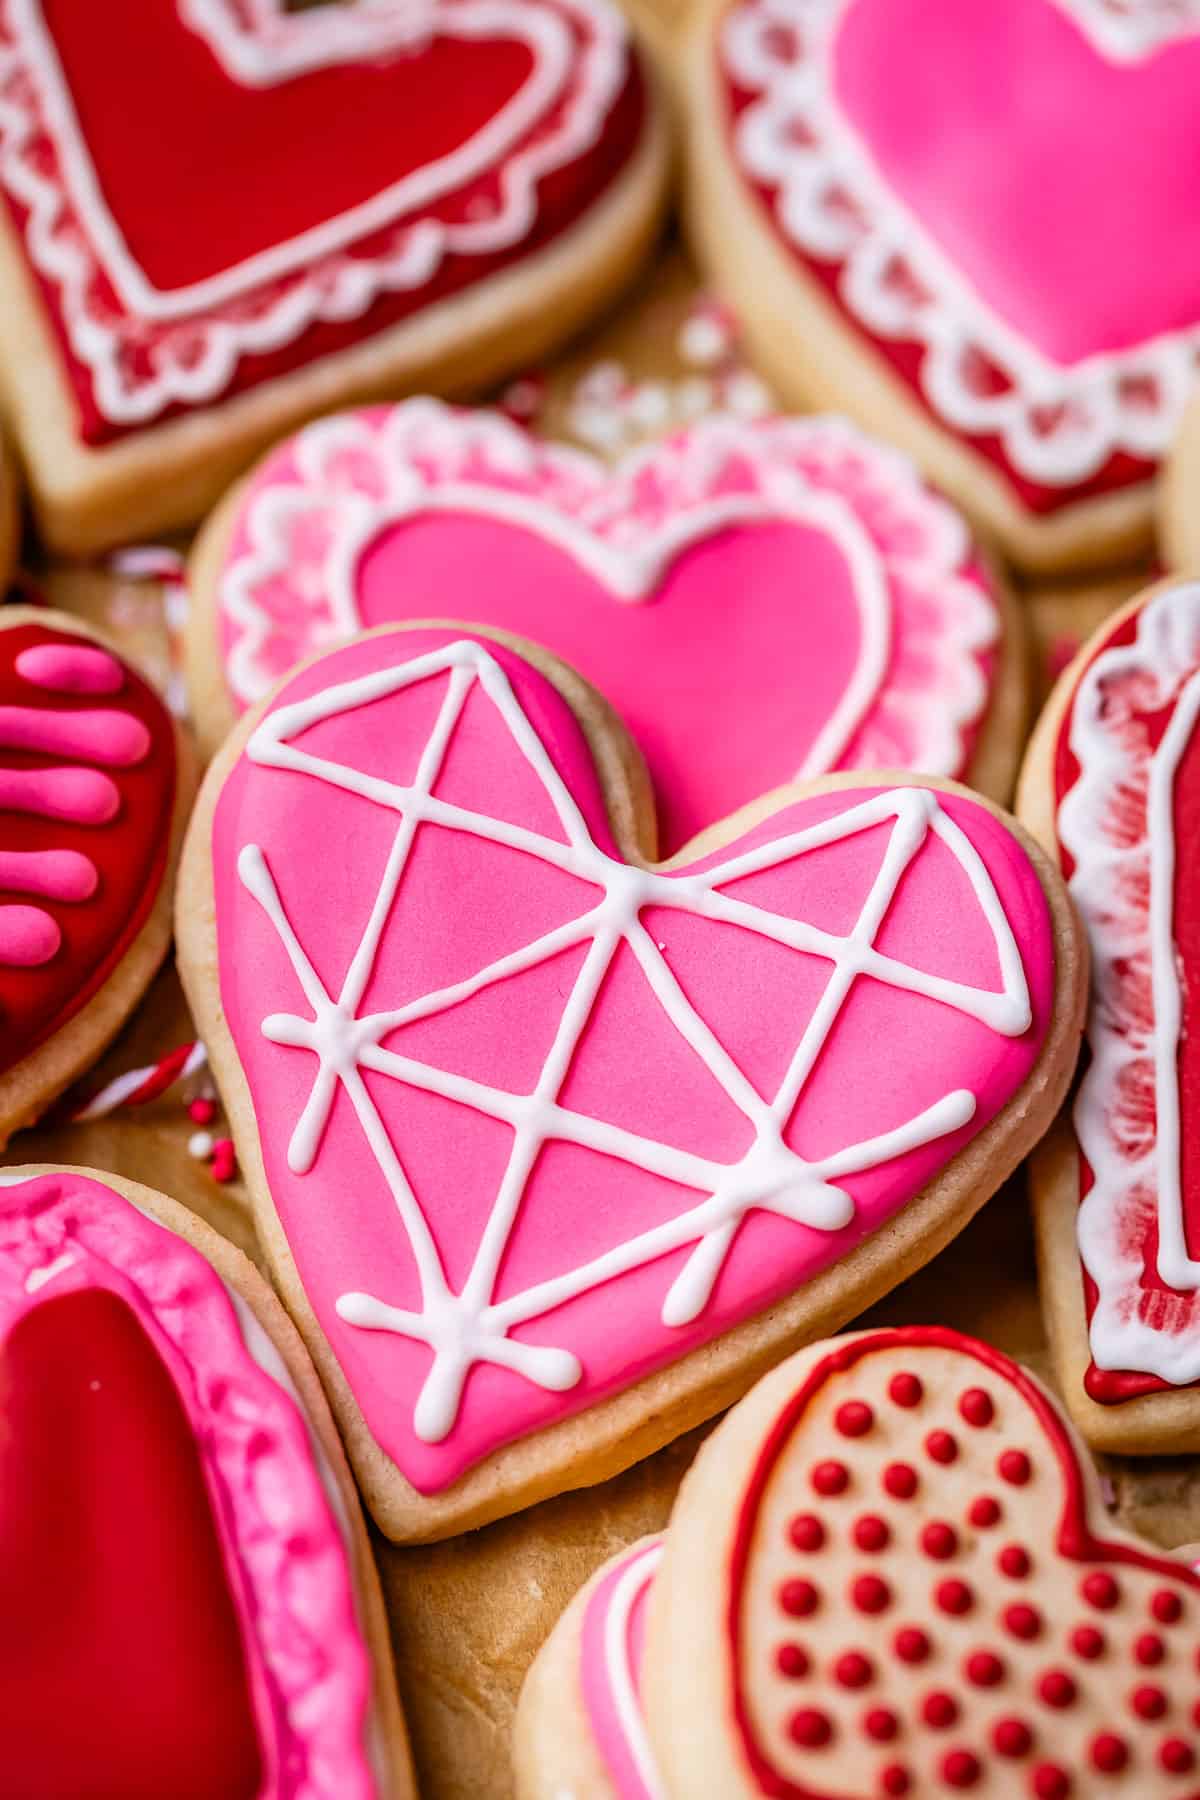 heart shaped sugar cookie with pink royal icing and white details.